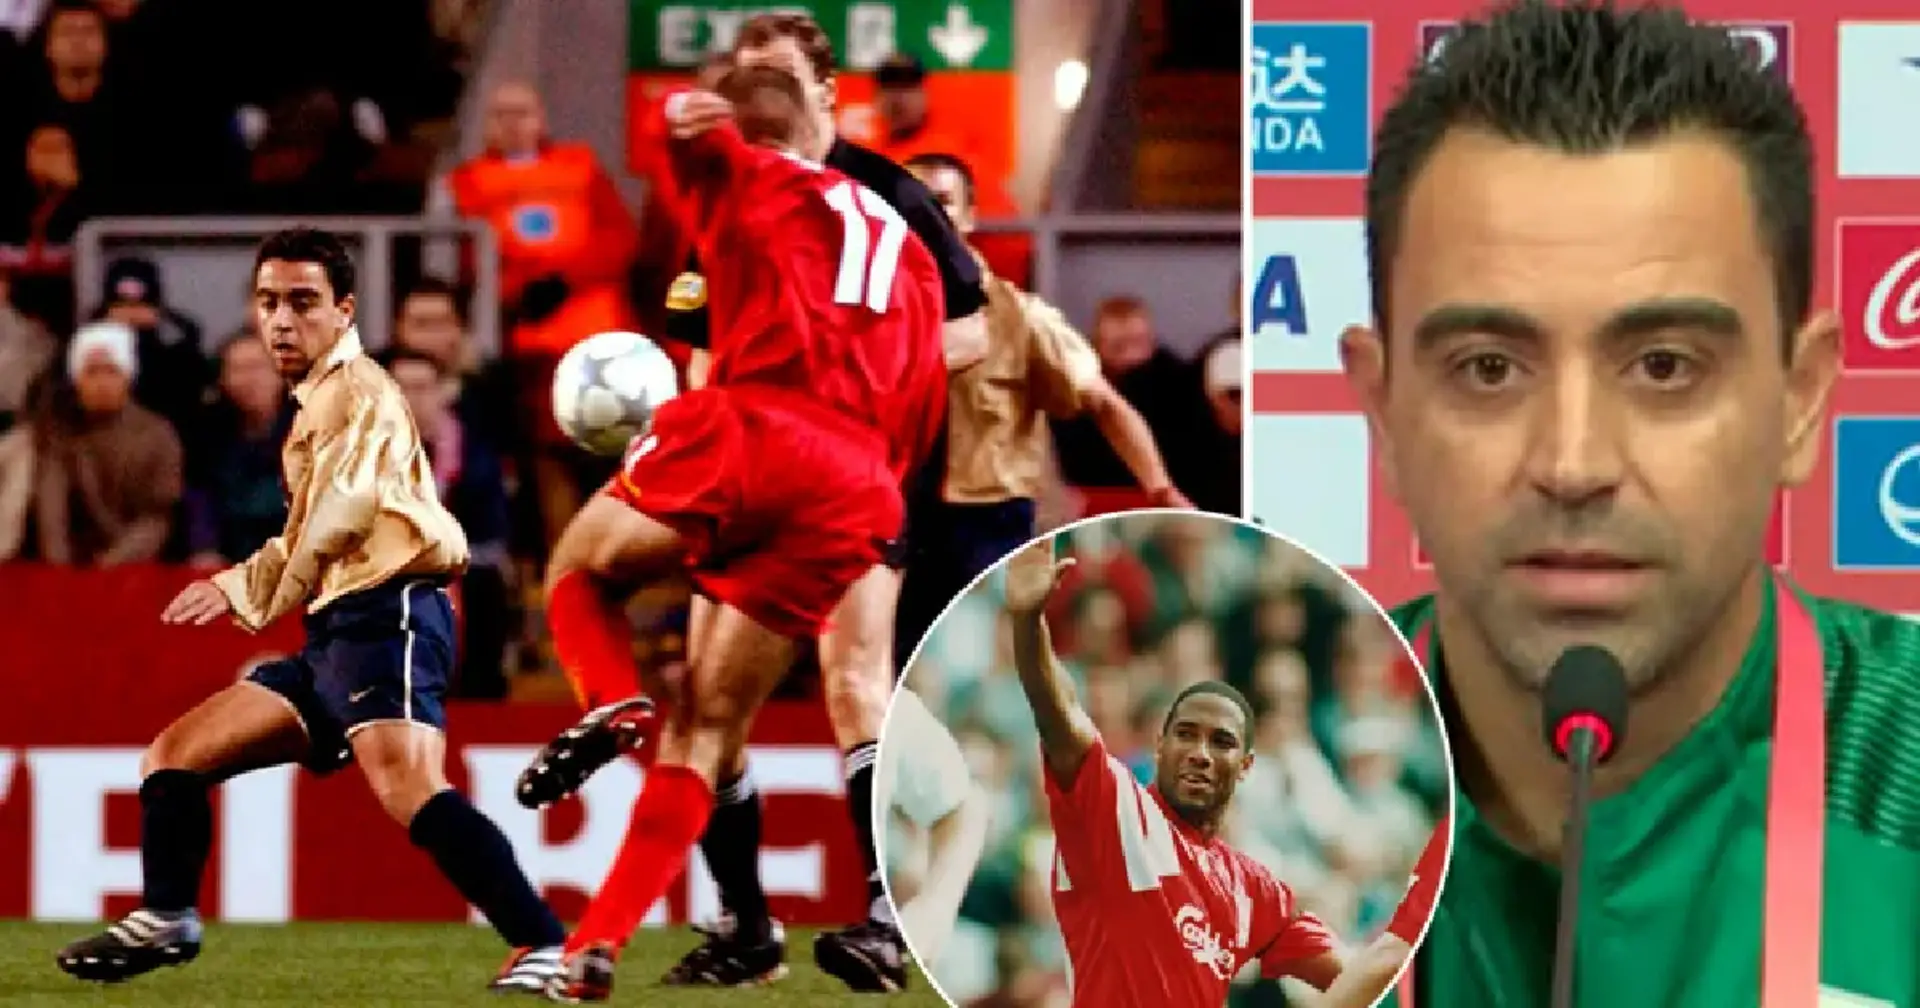 'I couldn't believe it': Throwback to when Xavi revealed how playing Liverpool at Anfield left him speechless